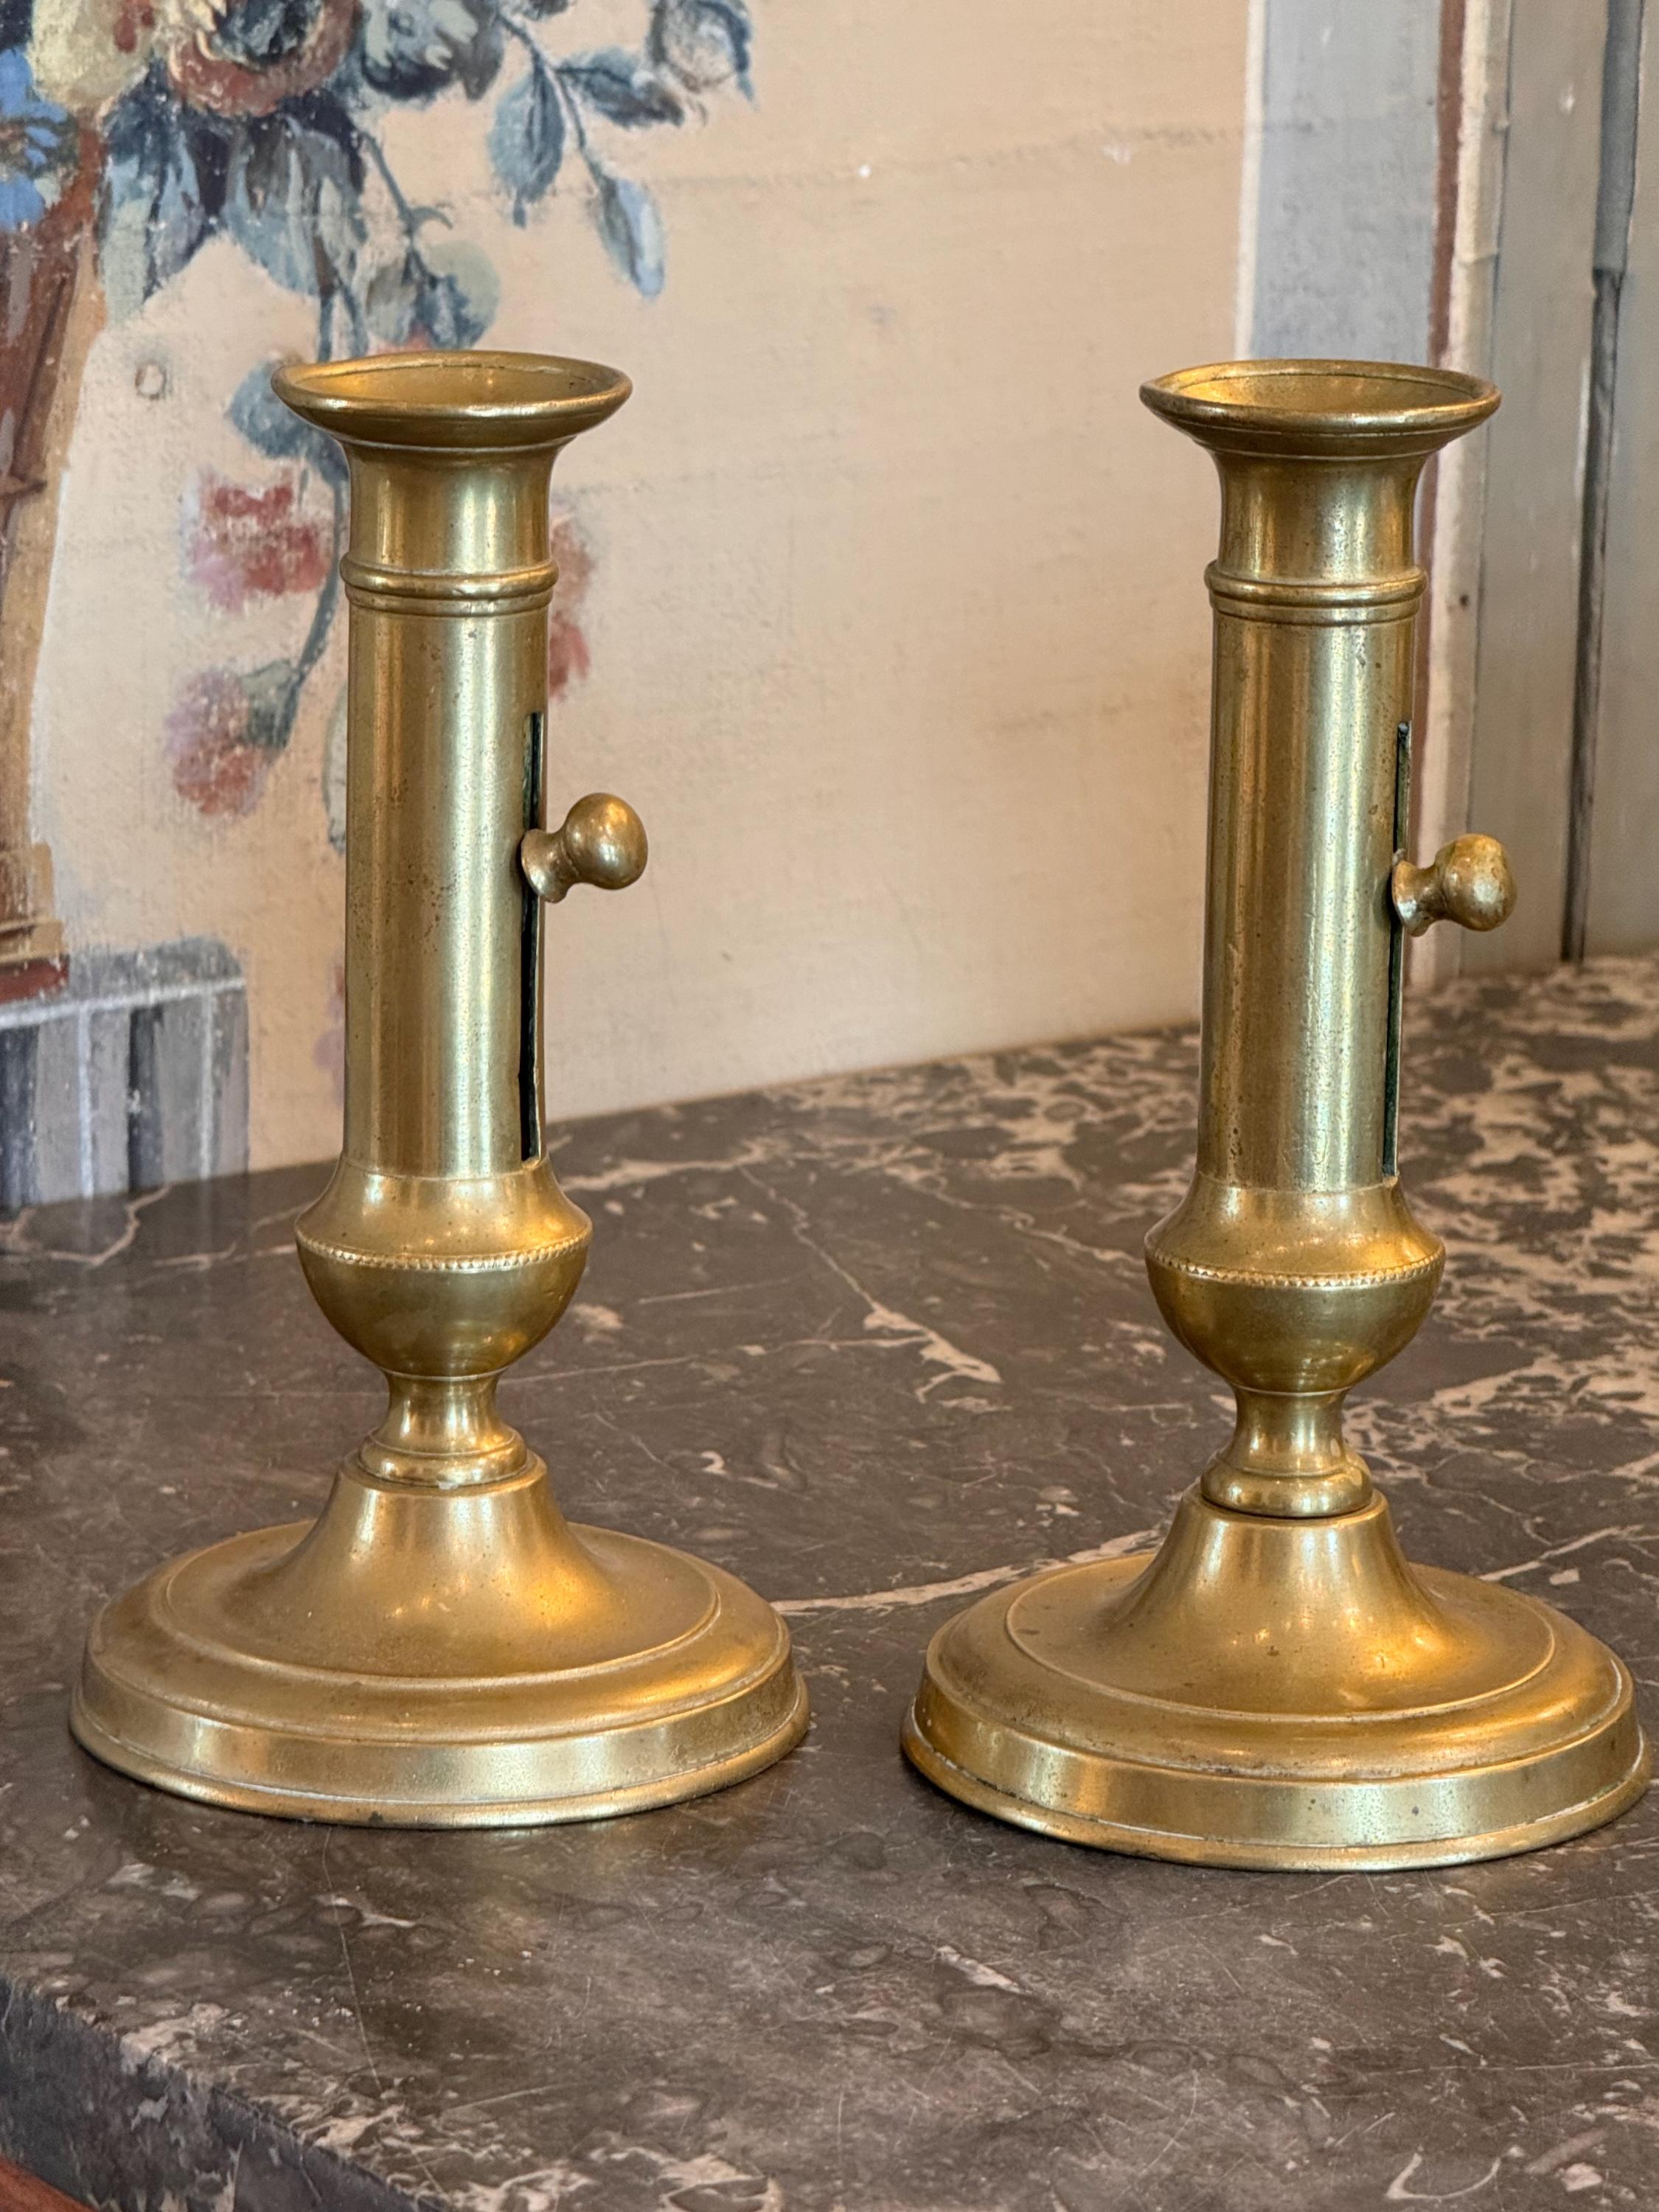 These are called push up candle sticks. They are brass and very pretty.